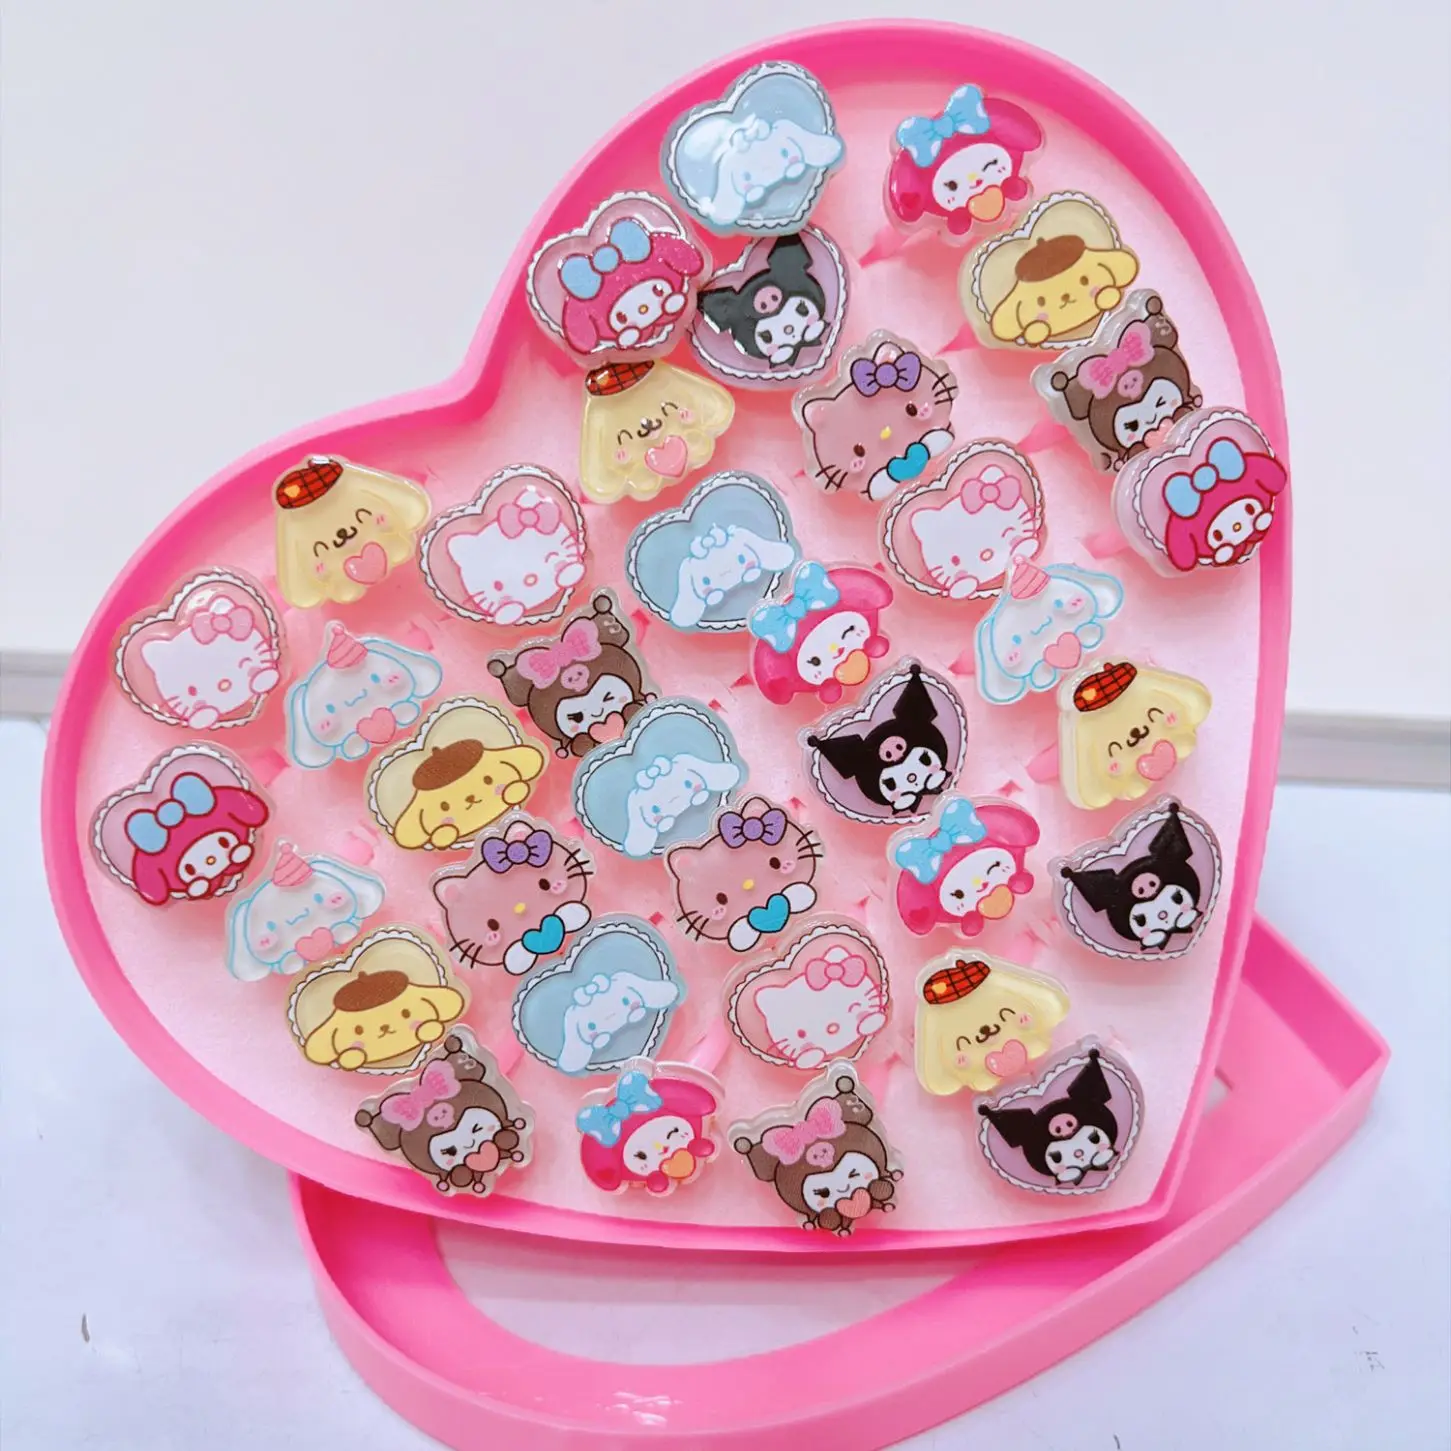 36Pcs Set Sanrio Hello Kitty Kid Ring Kids Adjustable Baby Rings Fashion Cartoon Children Girl Rings Heart Box Christmas Gifts 36pcs lot hot sale kids cute cartoon rings flower animal shape ring set mix finger jewelry creative accessories girl child gifts